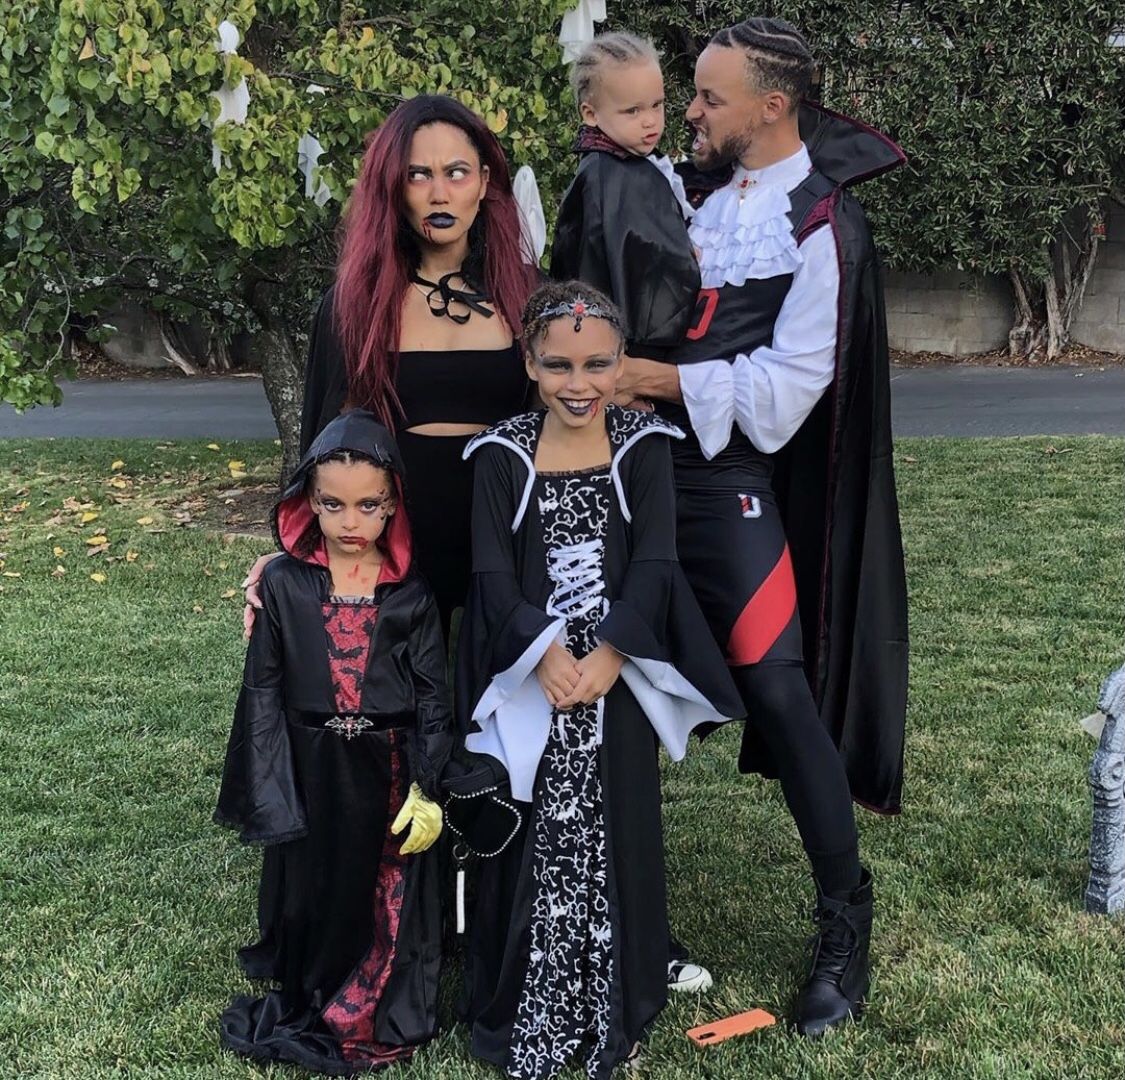 likhoa unconventional halloween costume ideas from stephen curry s family and their adorable kids for 6538cffcad187 Unconventional Halloween Costume Ideas From Stephen Curry's Family And Their Adorable Kids For 2023